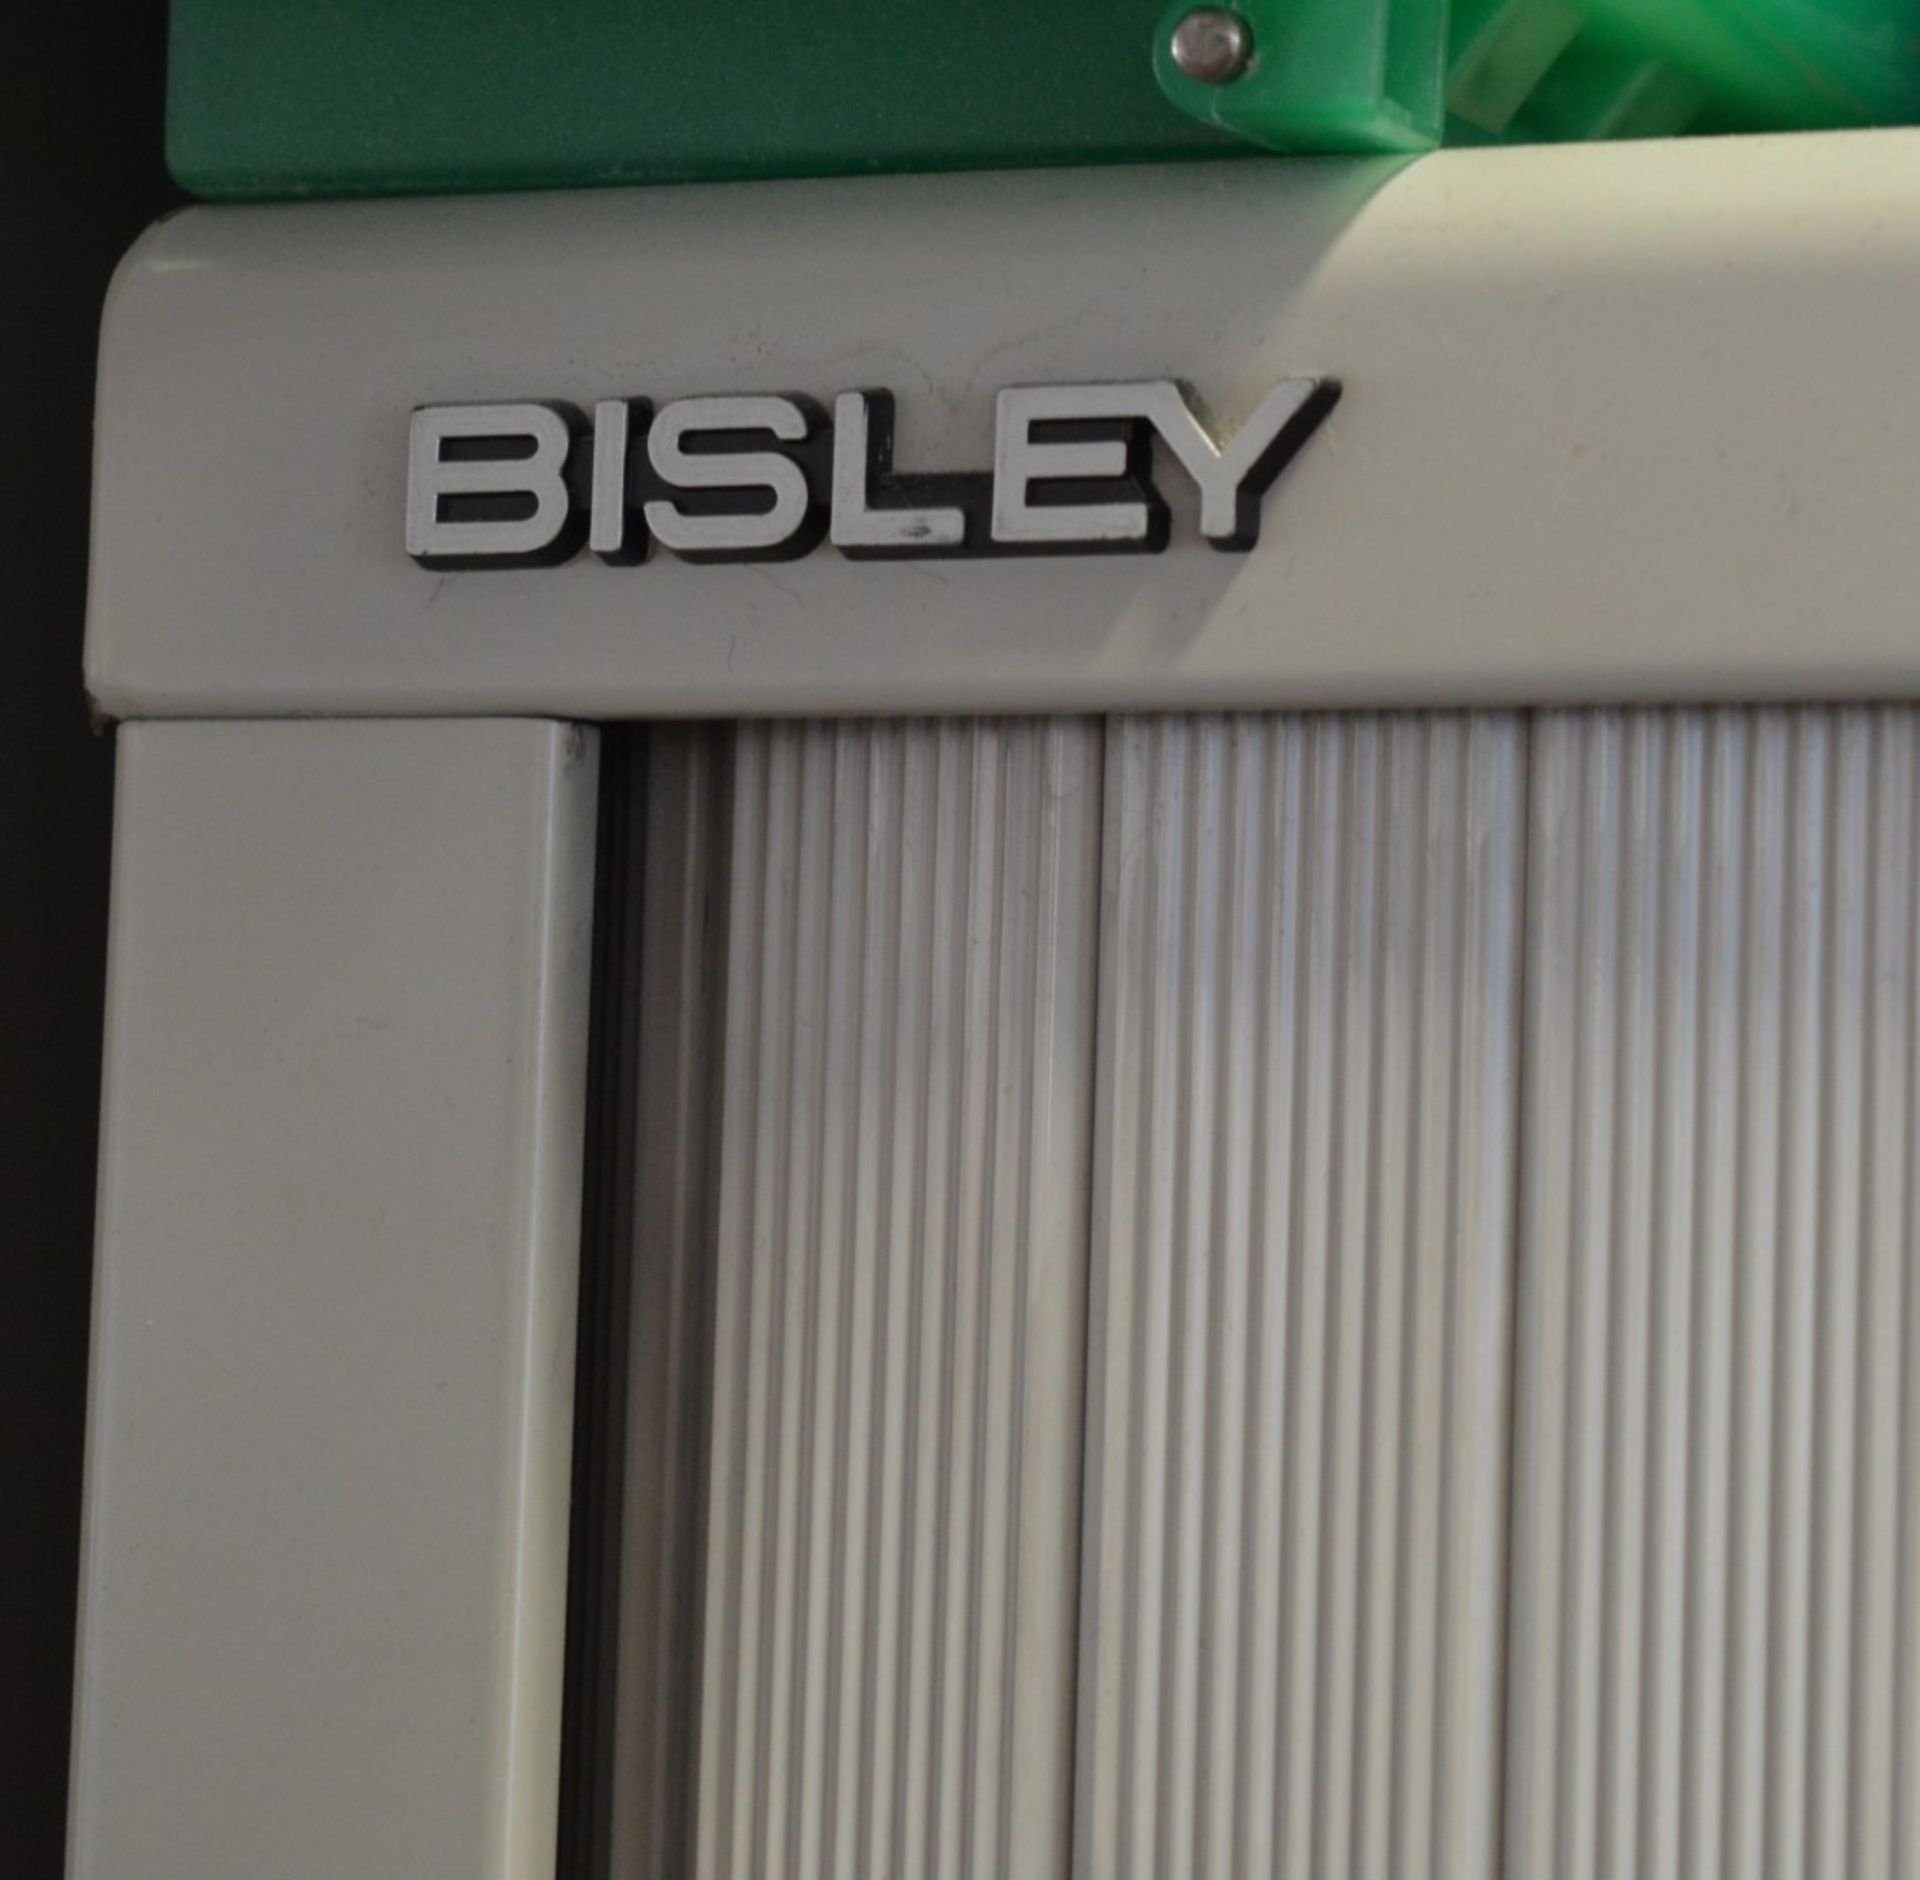 1 x Bisley Office Storage Cabinet With Tambour Sliding Doors - Does NOT Include Key - H165 x W100 - Image 2 of 3